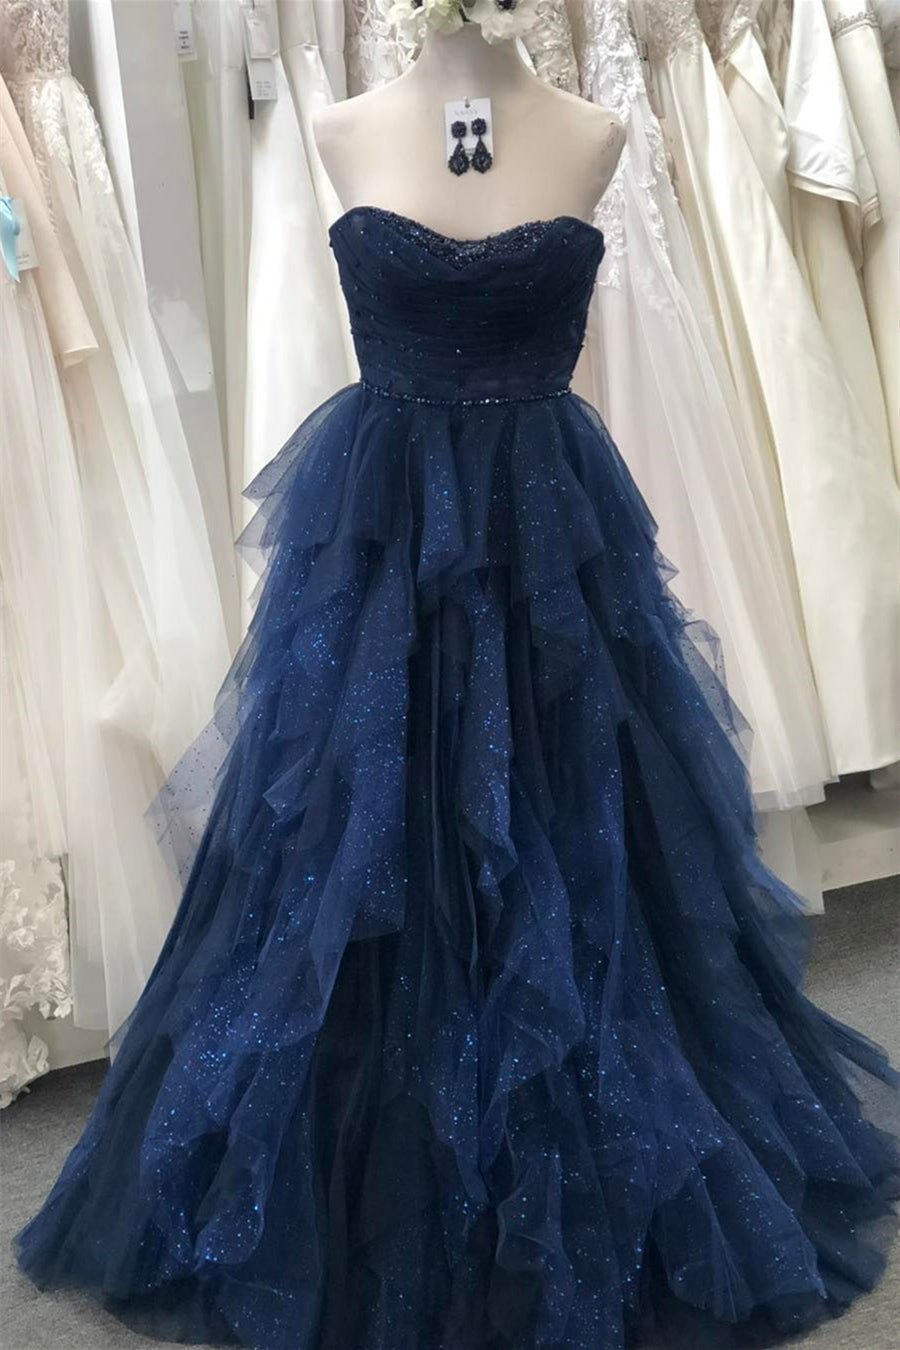 Sparkly Navy Blue Strapless Ruffle Layers Tulle Long Corset Prom Dress outfits, Formal Dress Cheap